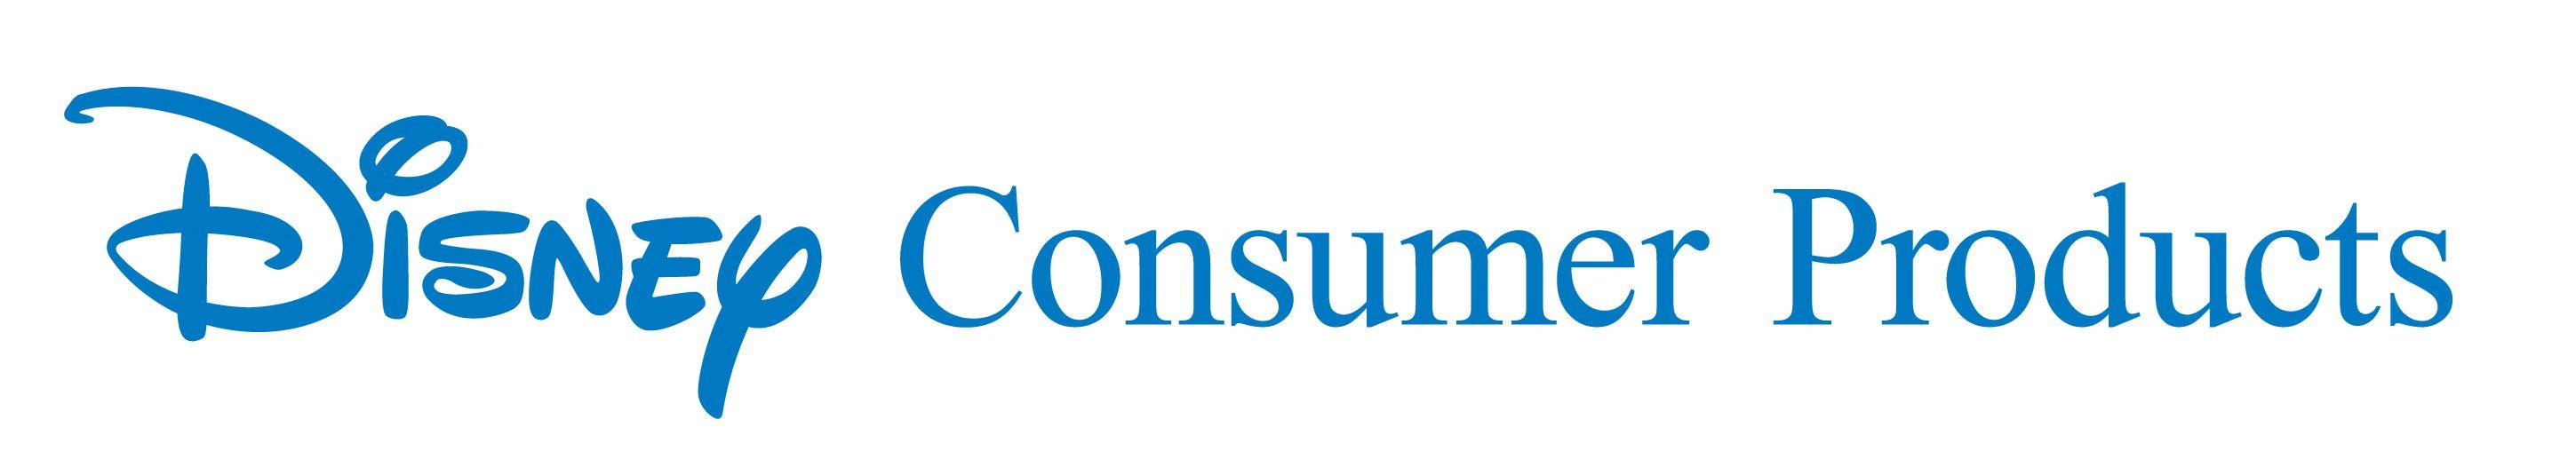 Consumer Products Logo - Disney Consumer Products